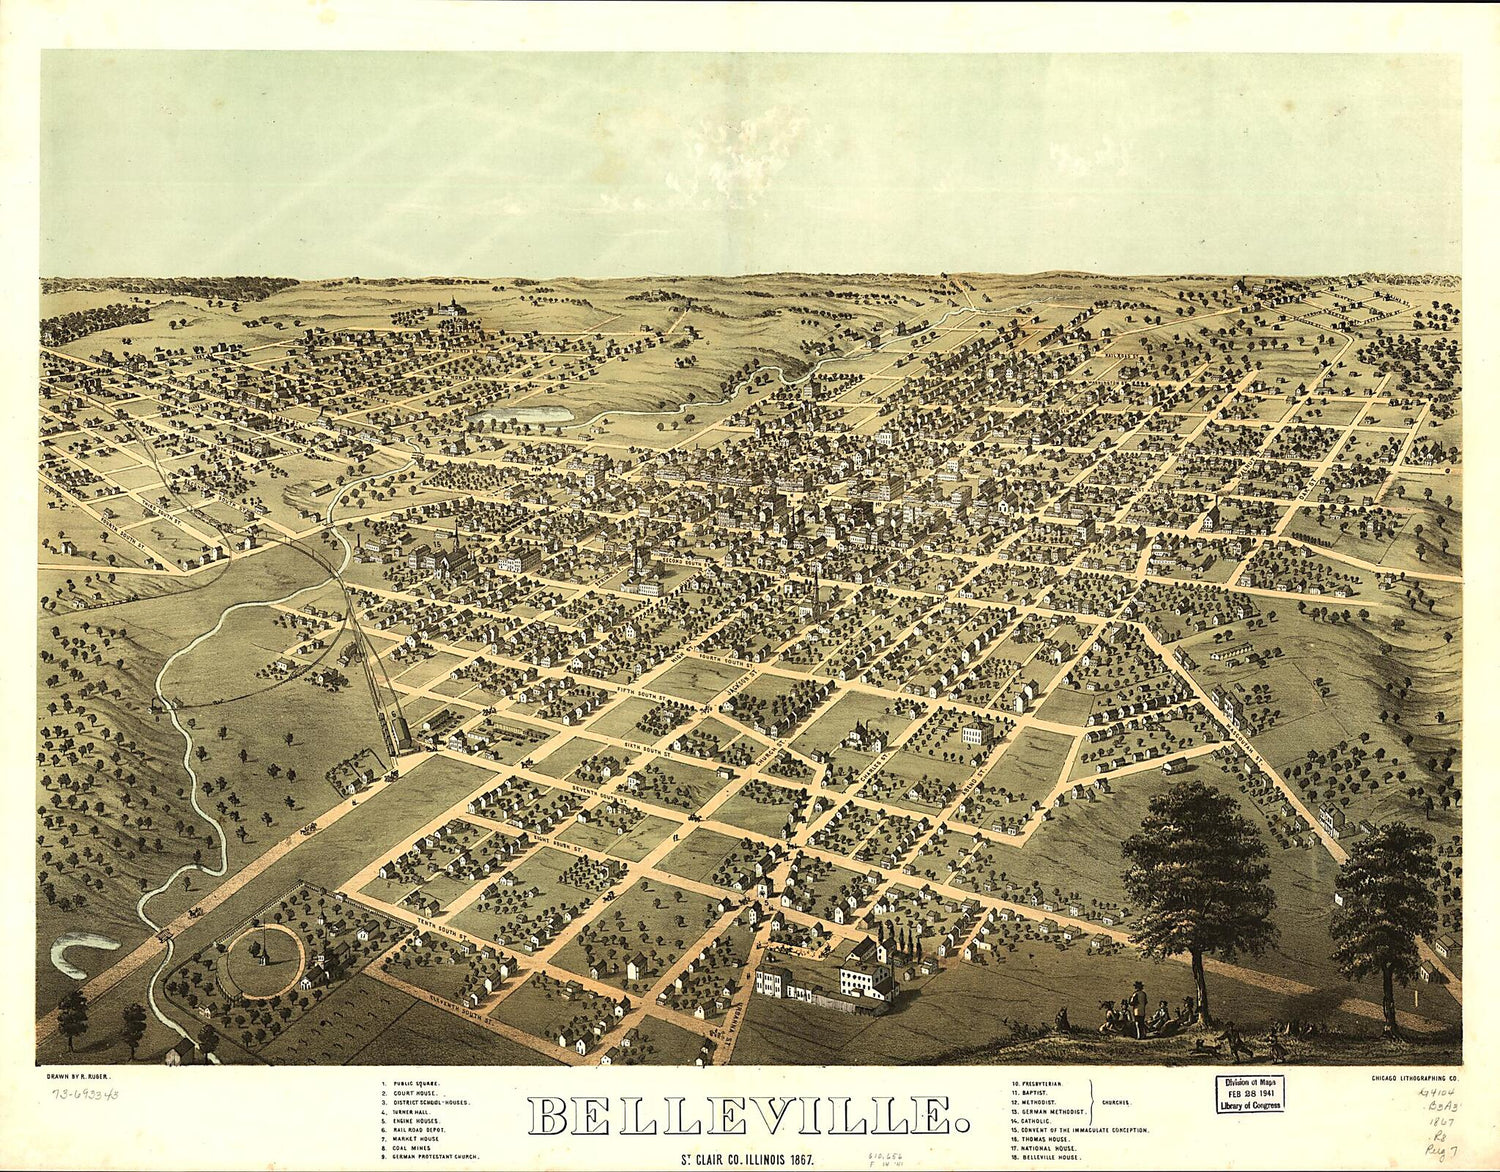 This old map of Belleville, St. Clair County, Illinois from 1867 was created by  Chicago Lithographing Co, A. Ruger in 1867